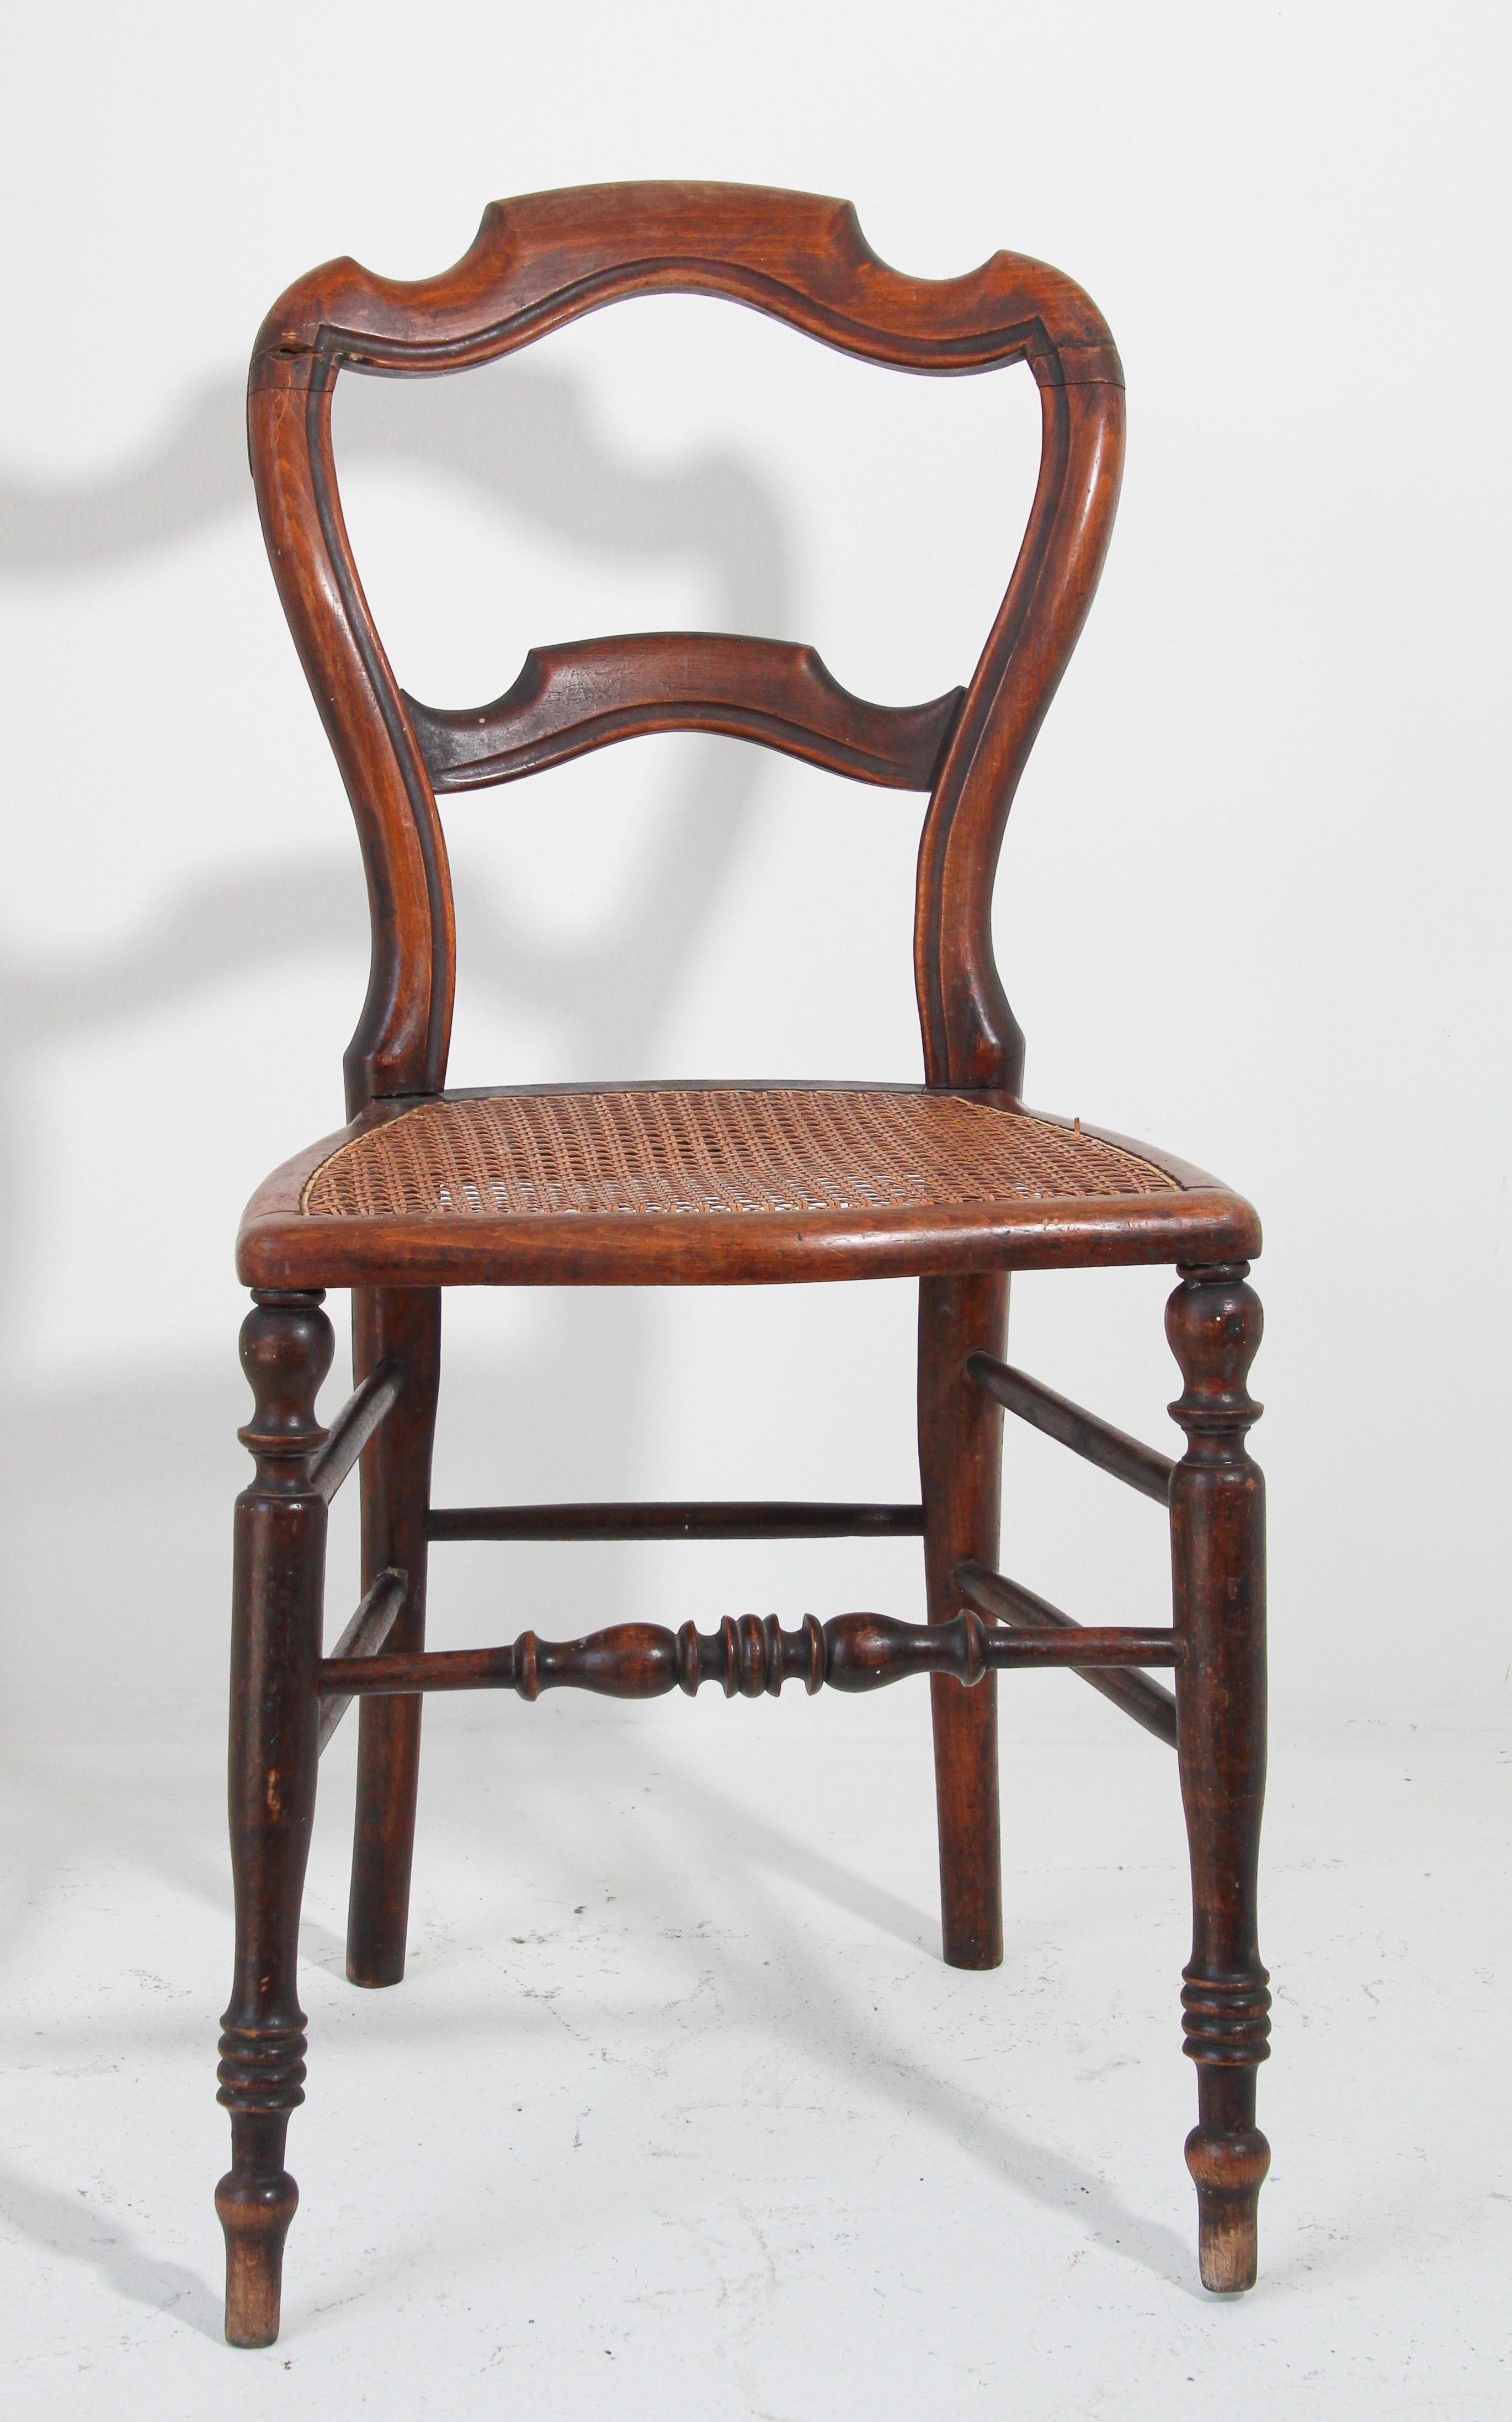 Hand-Crafted 19th Century French Provincial Walnut Caned Chair